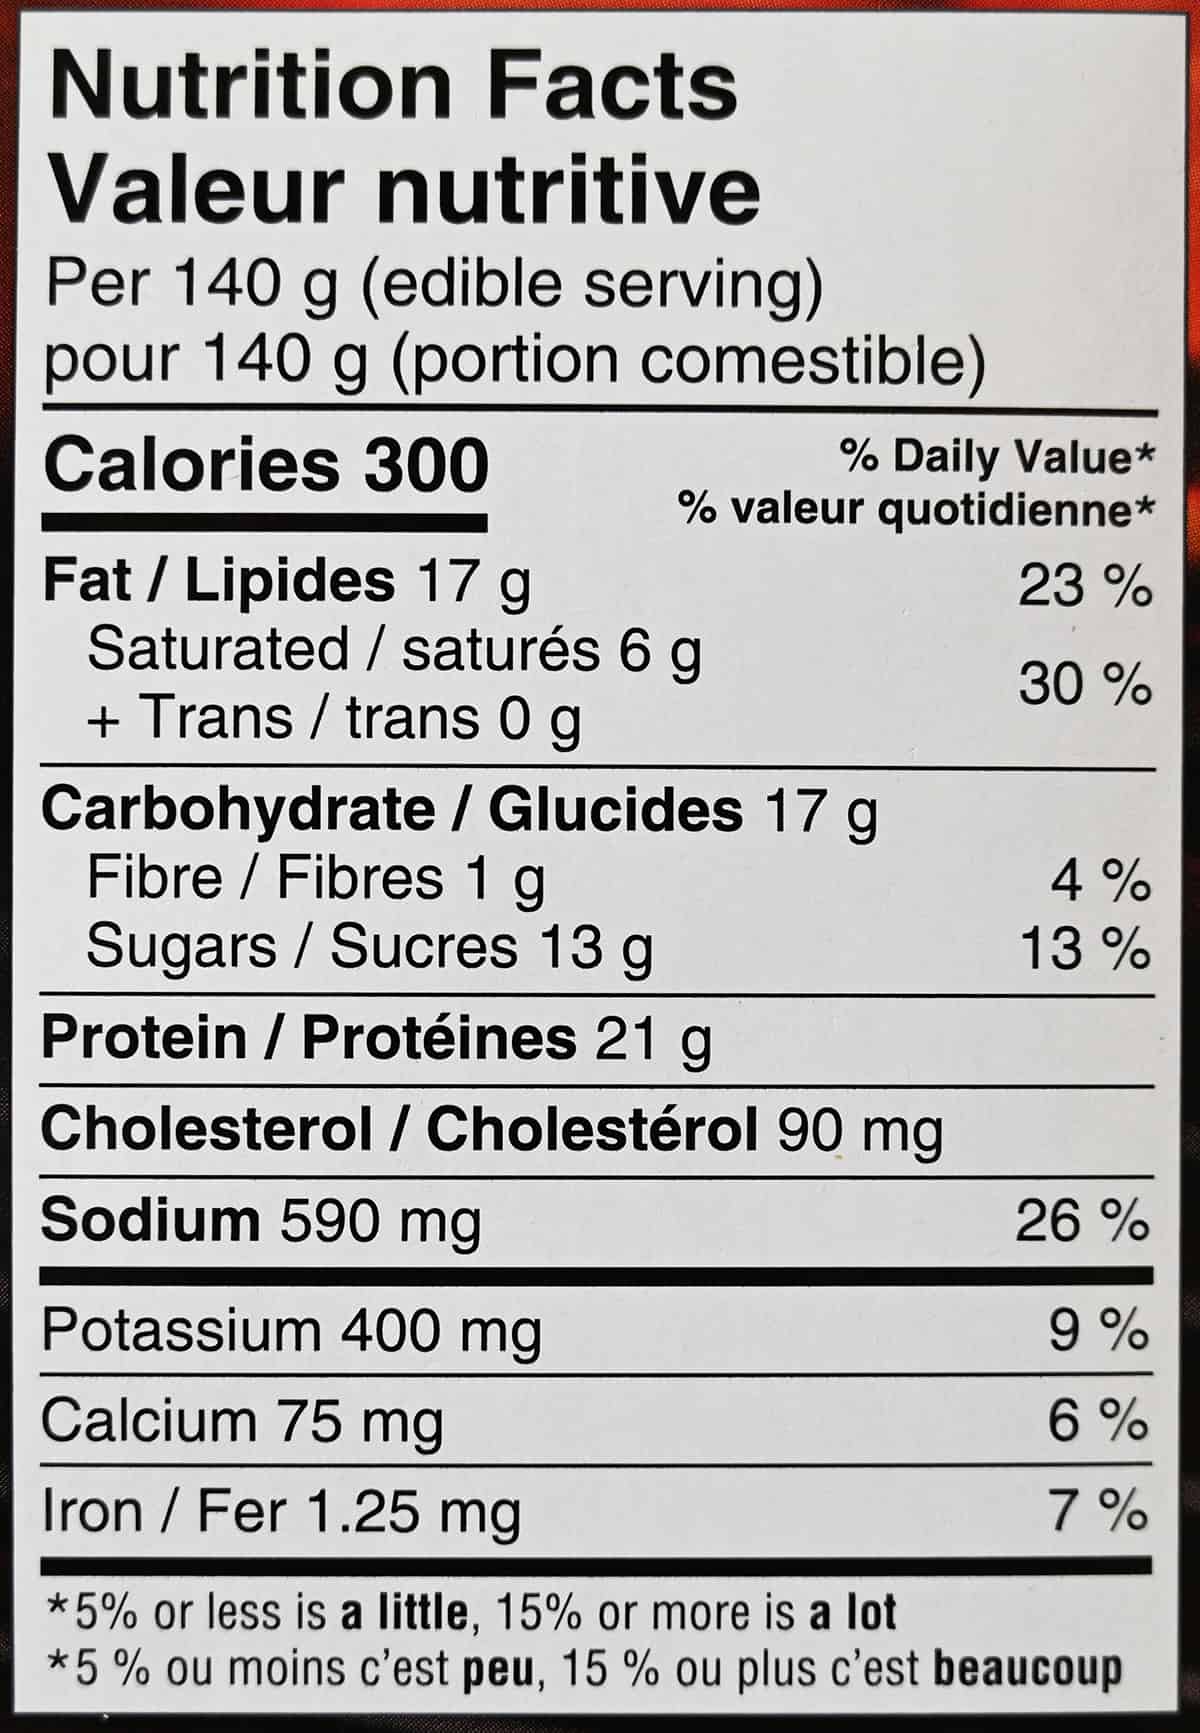 Image of the nutrition facts for the ribs from the back of the box.